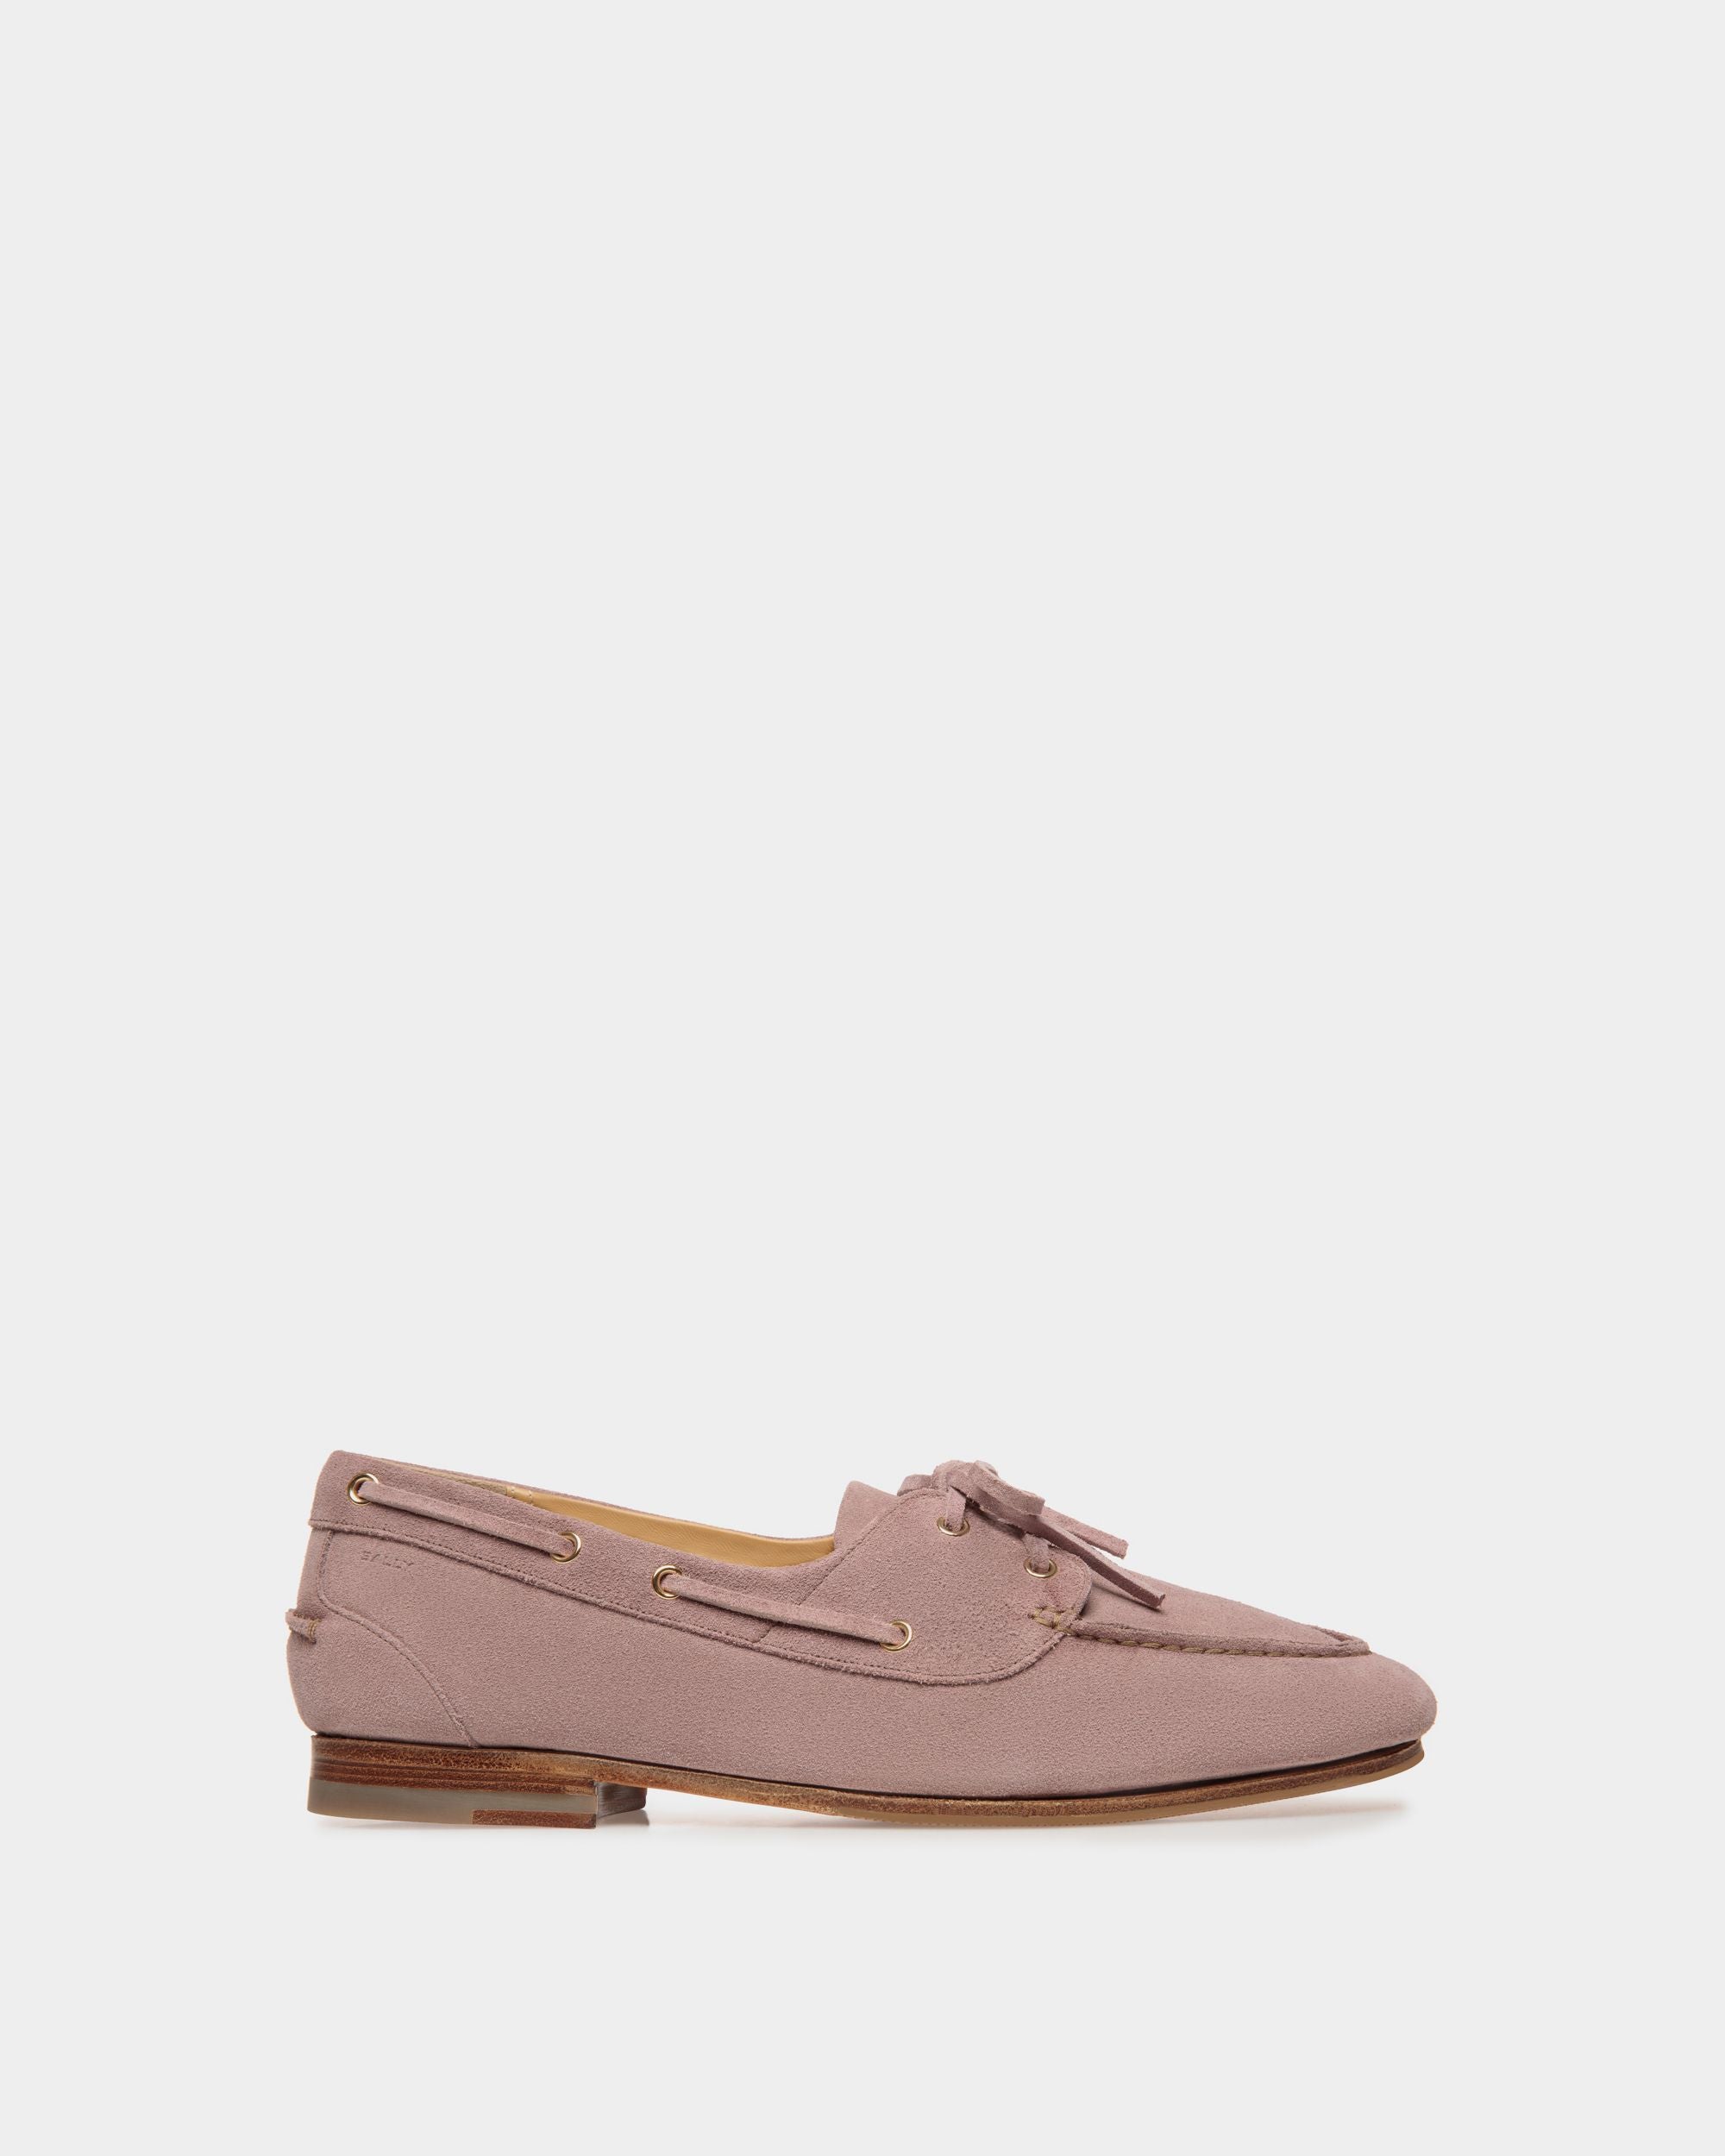 Plume | Men's Moccasin in Light Mauve Suede| Bally | Still Life Side